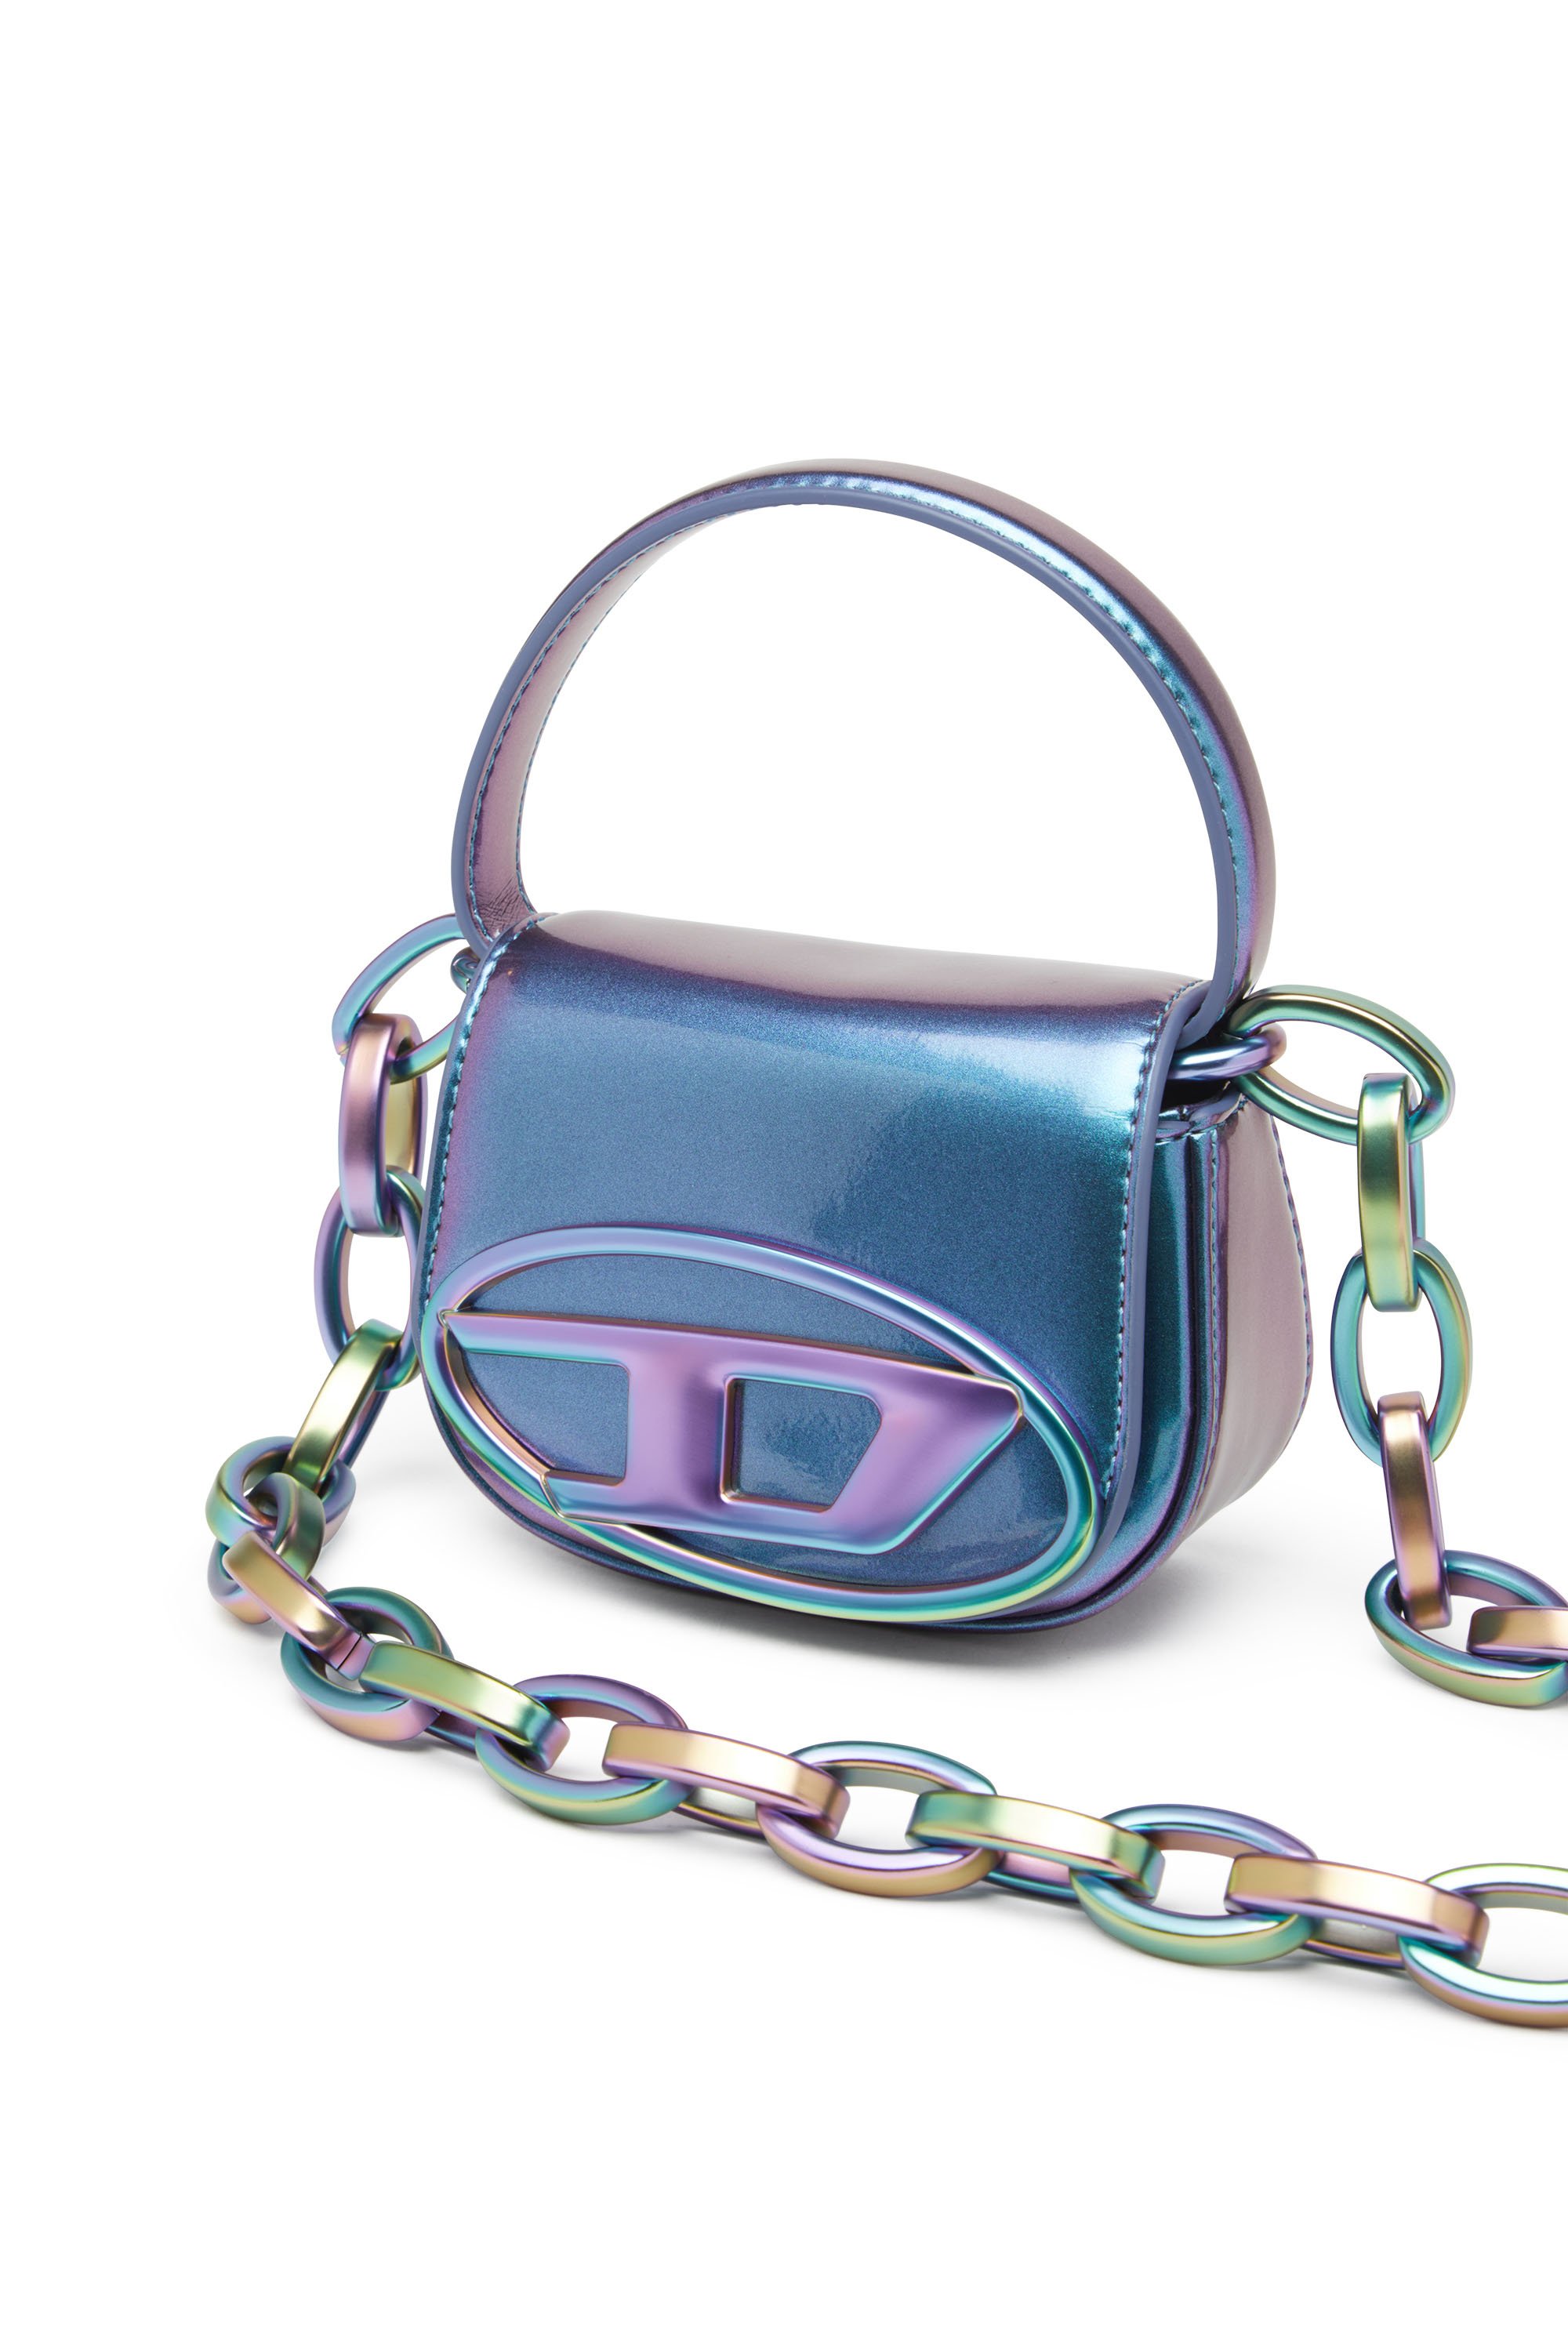 Diesel - 1DR XS, Woman 1DR XS-Iconic iridescent mini bag in Blue - Image 5